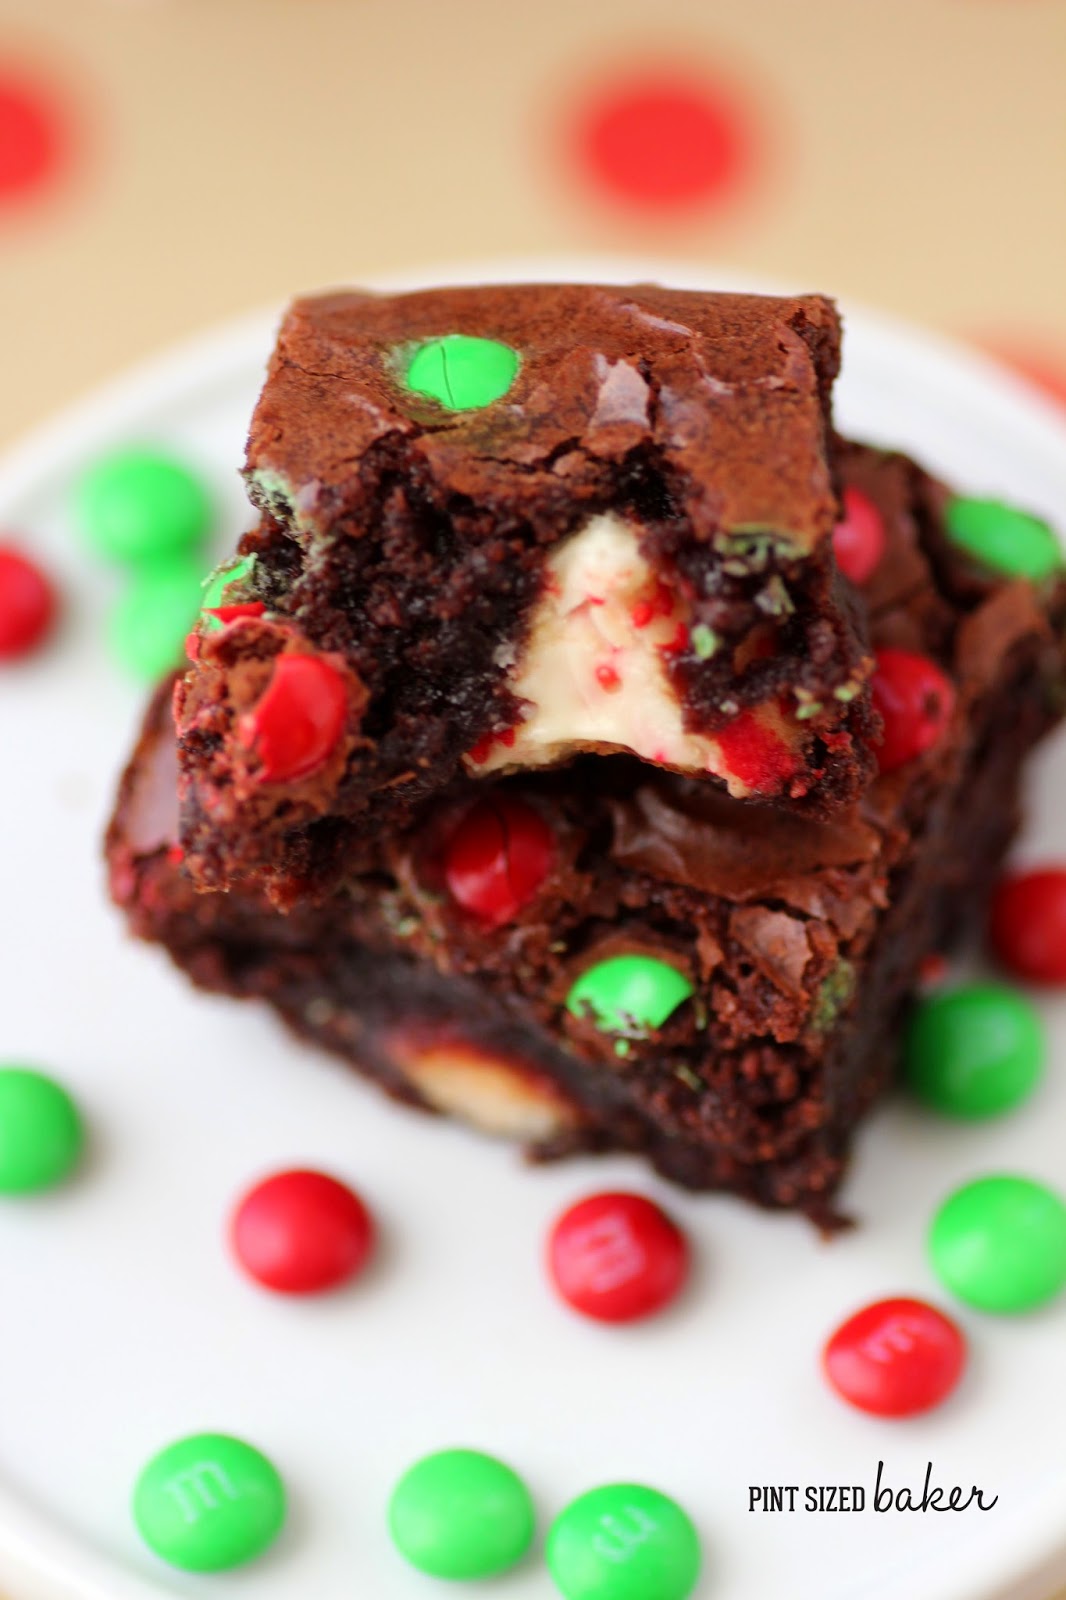 The Christmas season calls for these Candy Cane Kisses Brownies that are stuffed with a kiss and topped with mini M&Ms. Perfect for the kids!